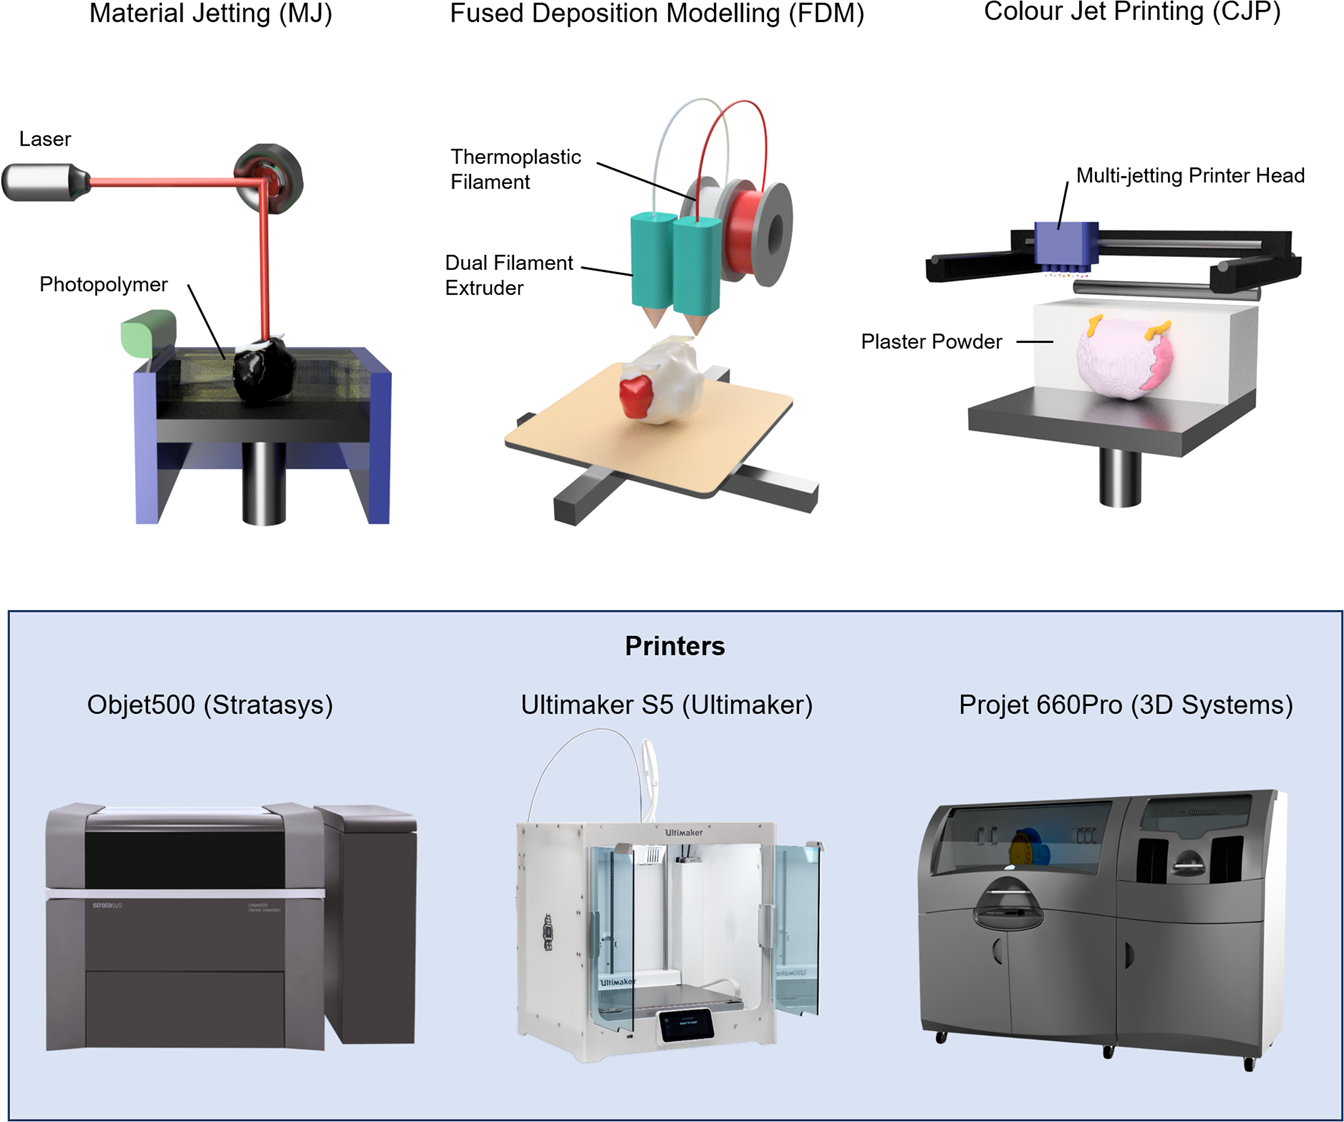 Multi-colour extrusion fused deposition modelling: a low-cost 3D printing  method for anatomical prostate cancer models | Scientific Reports